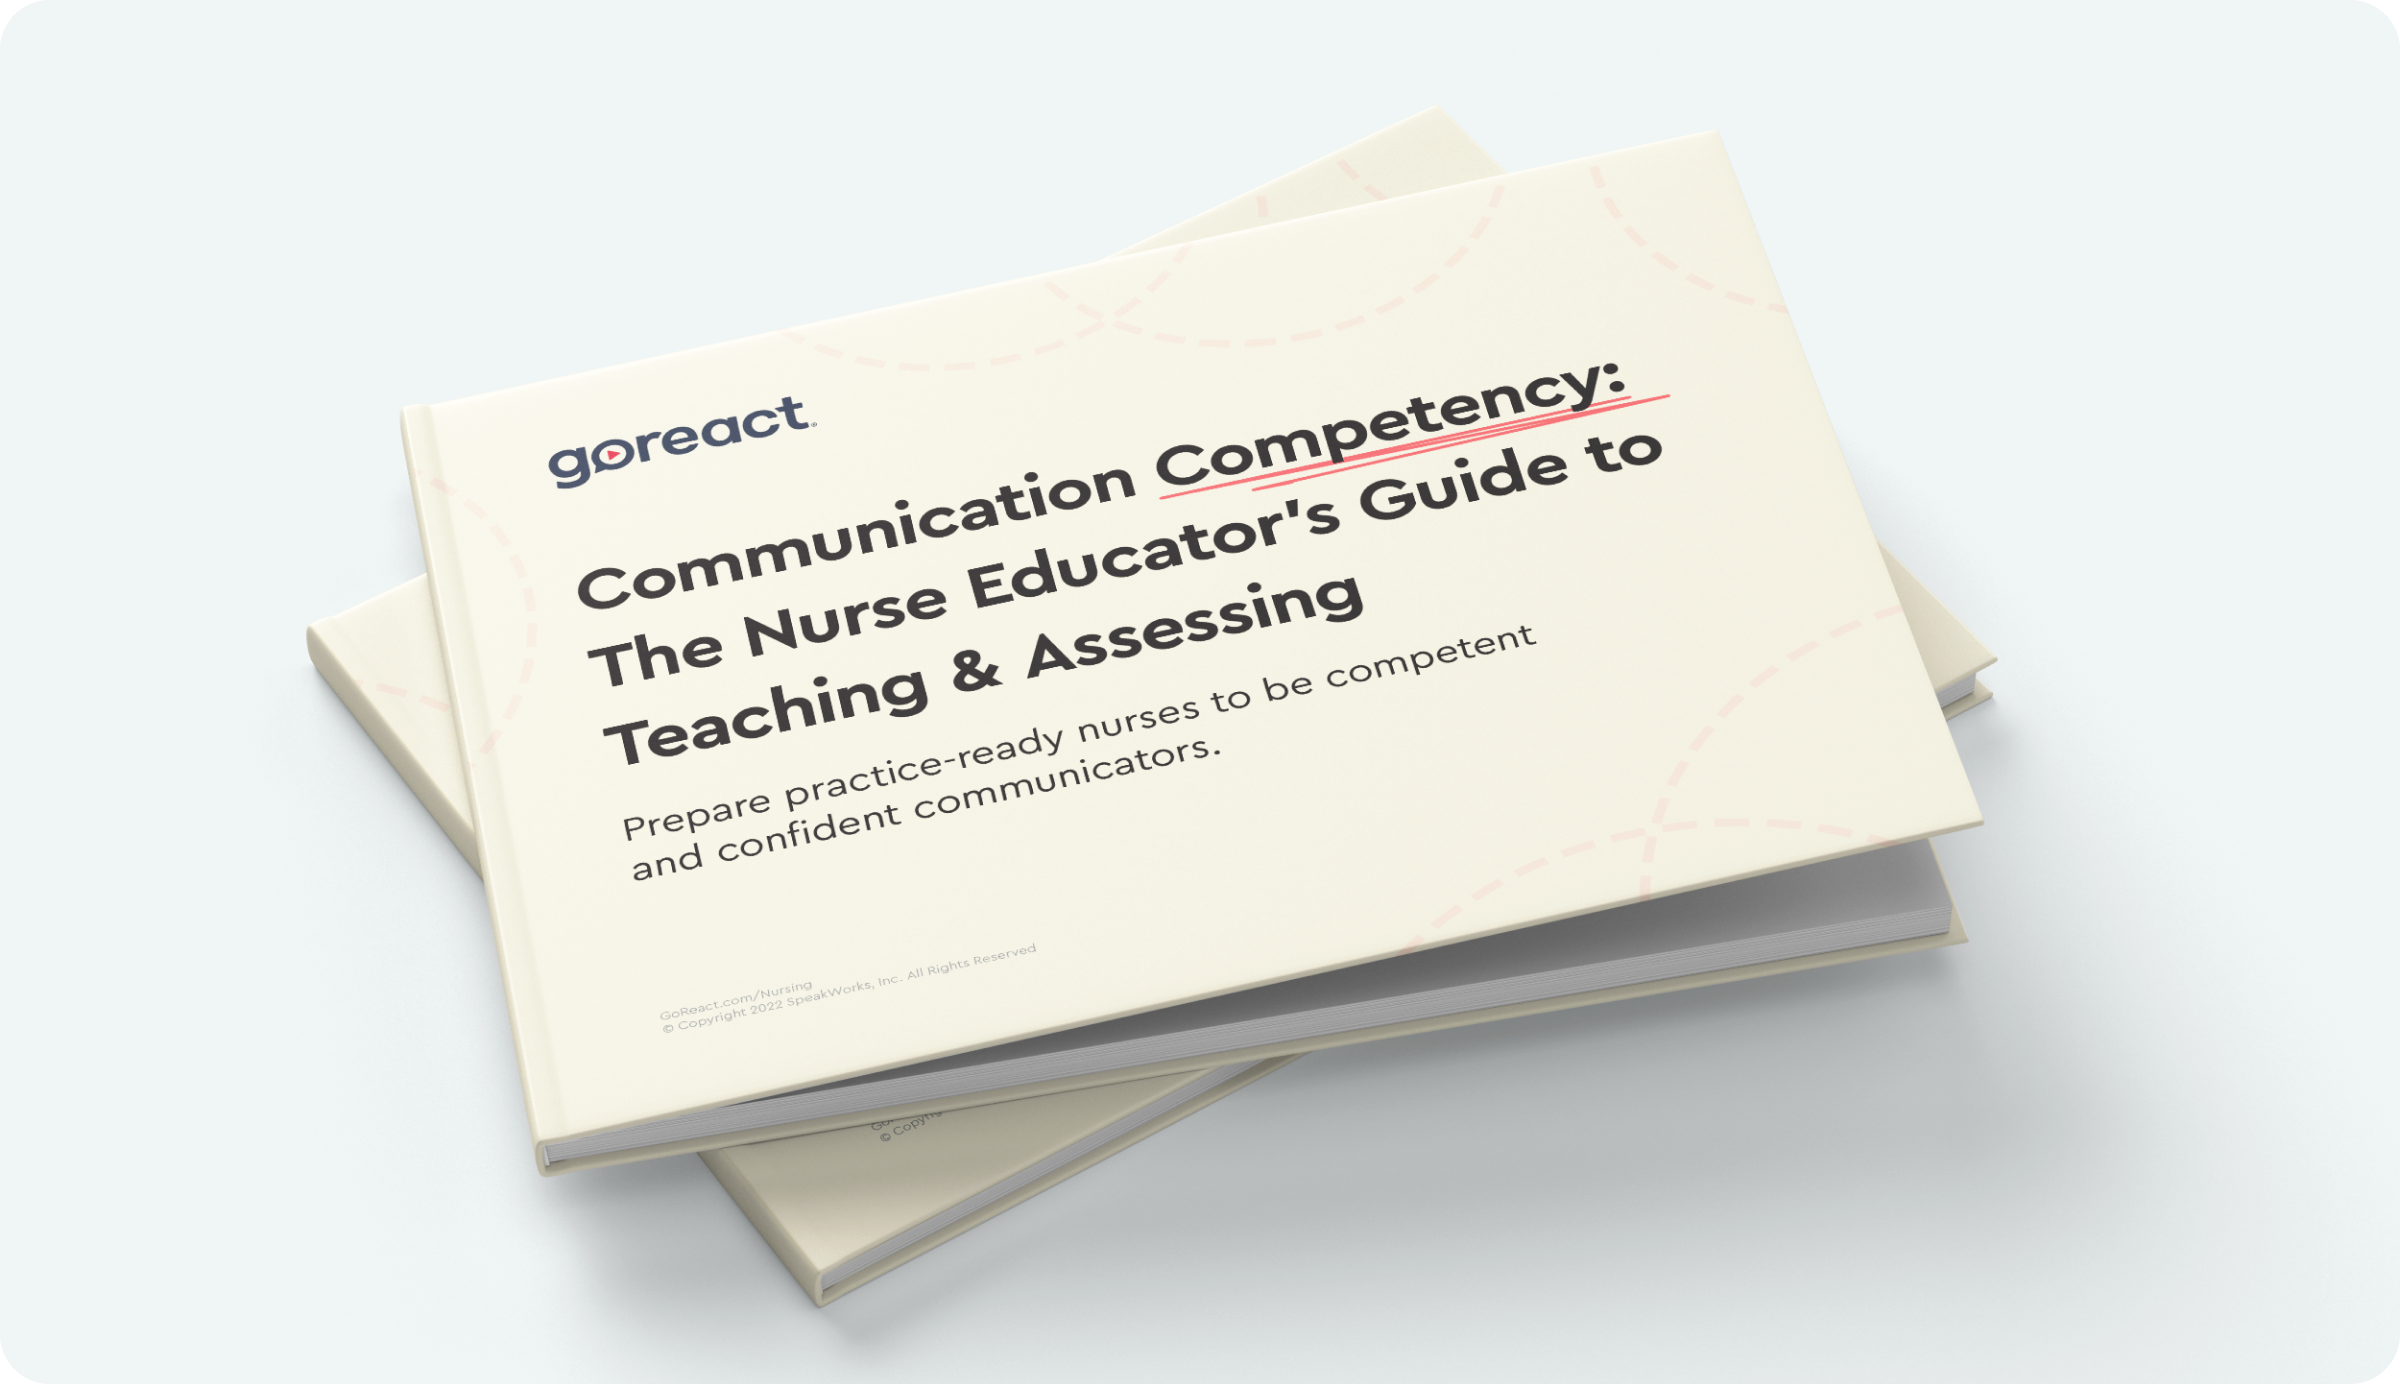 Communication Competency: The Nurse Educator’s Guide to Teaching & Assessing